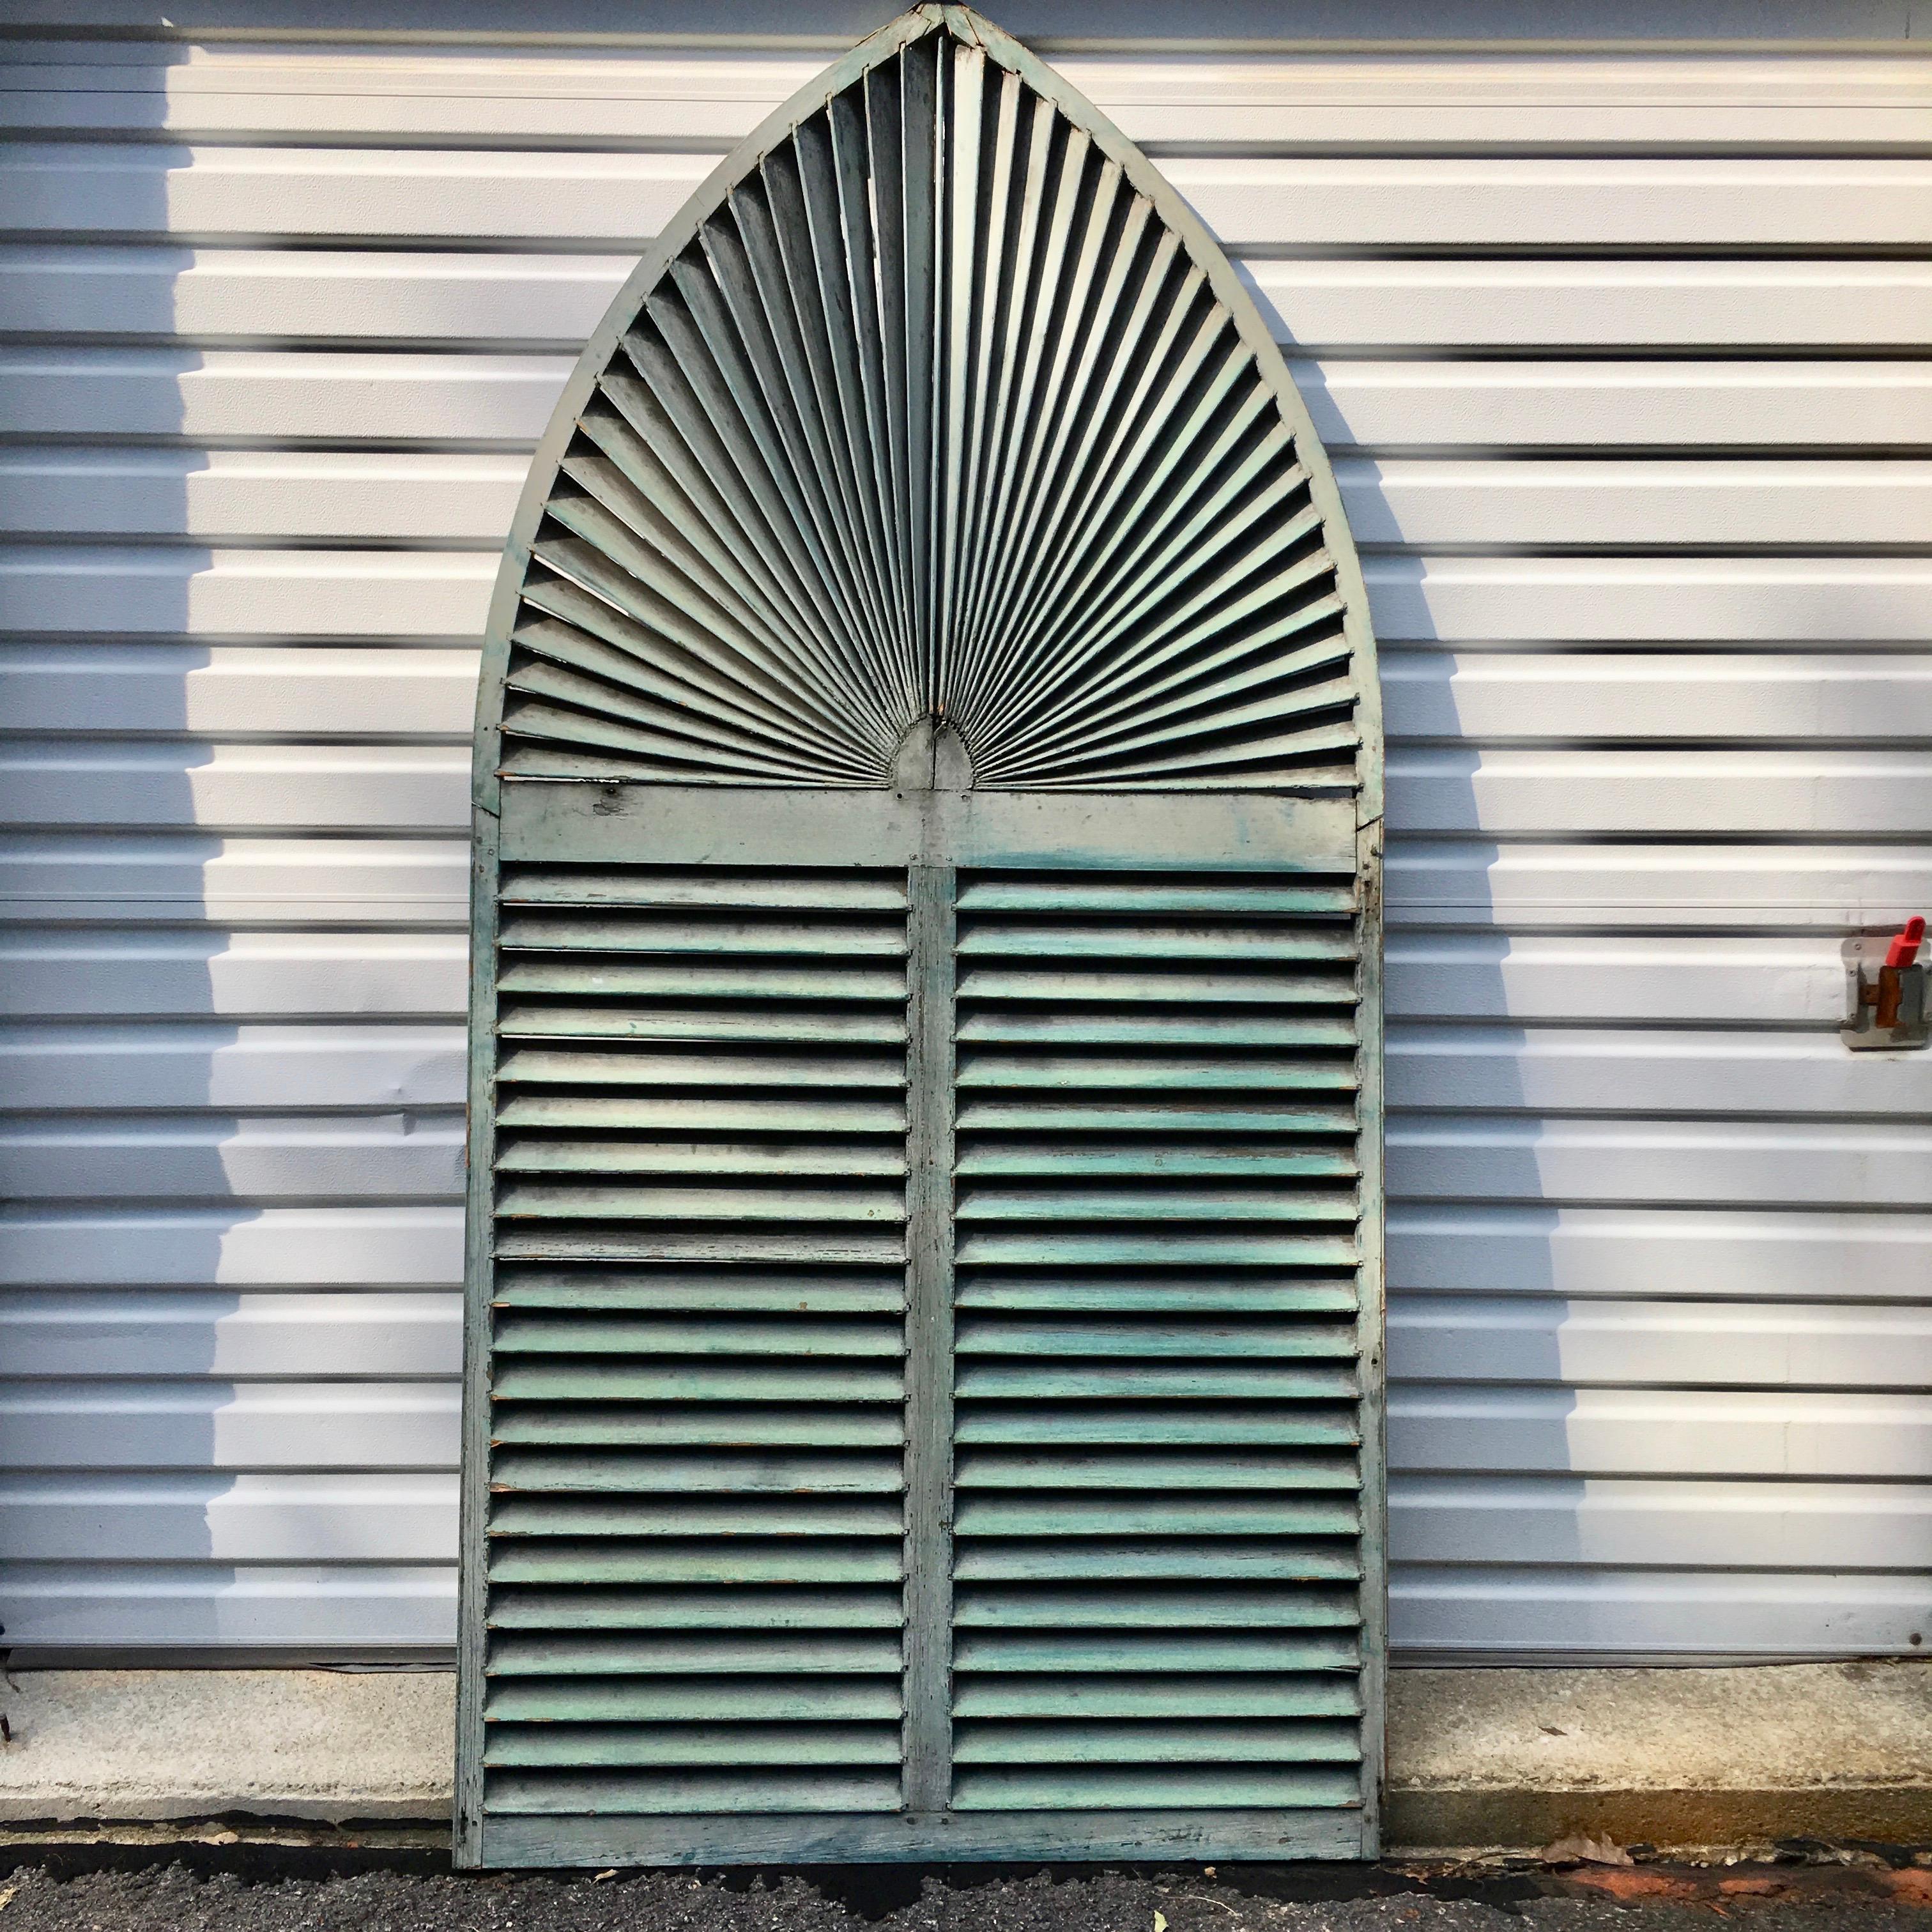 Currently in 1stdibs SATURDAY SALE

Large size fan louvered exterior window shutter in original rustic distressed old paint, green on front, black on verso. 91 inches tall by 45.5 inches wide. The arched portion begins 52 inches from the bottom.